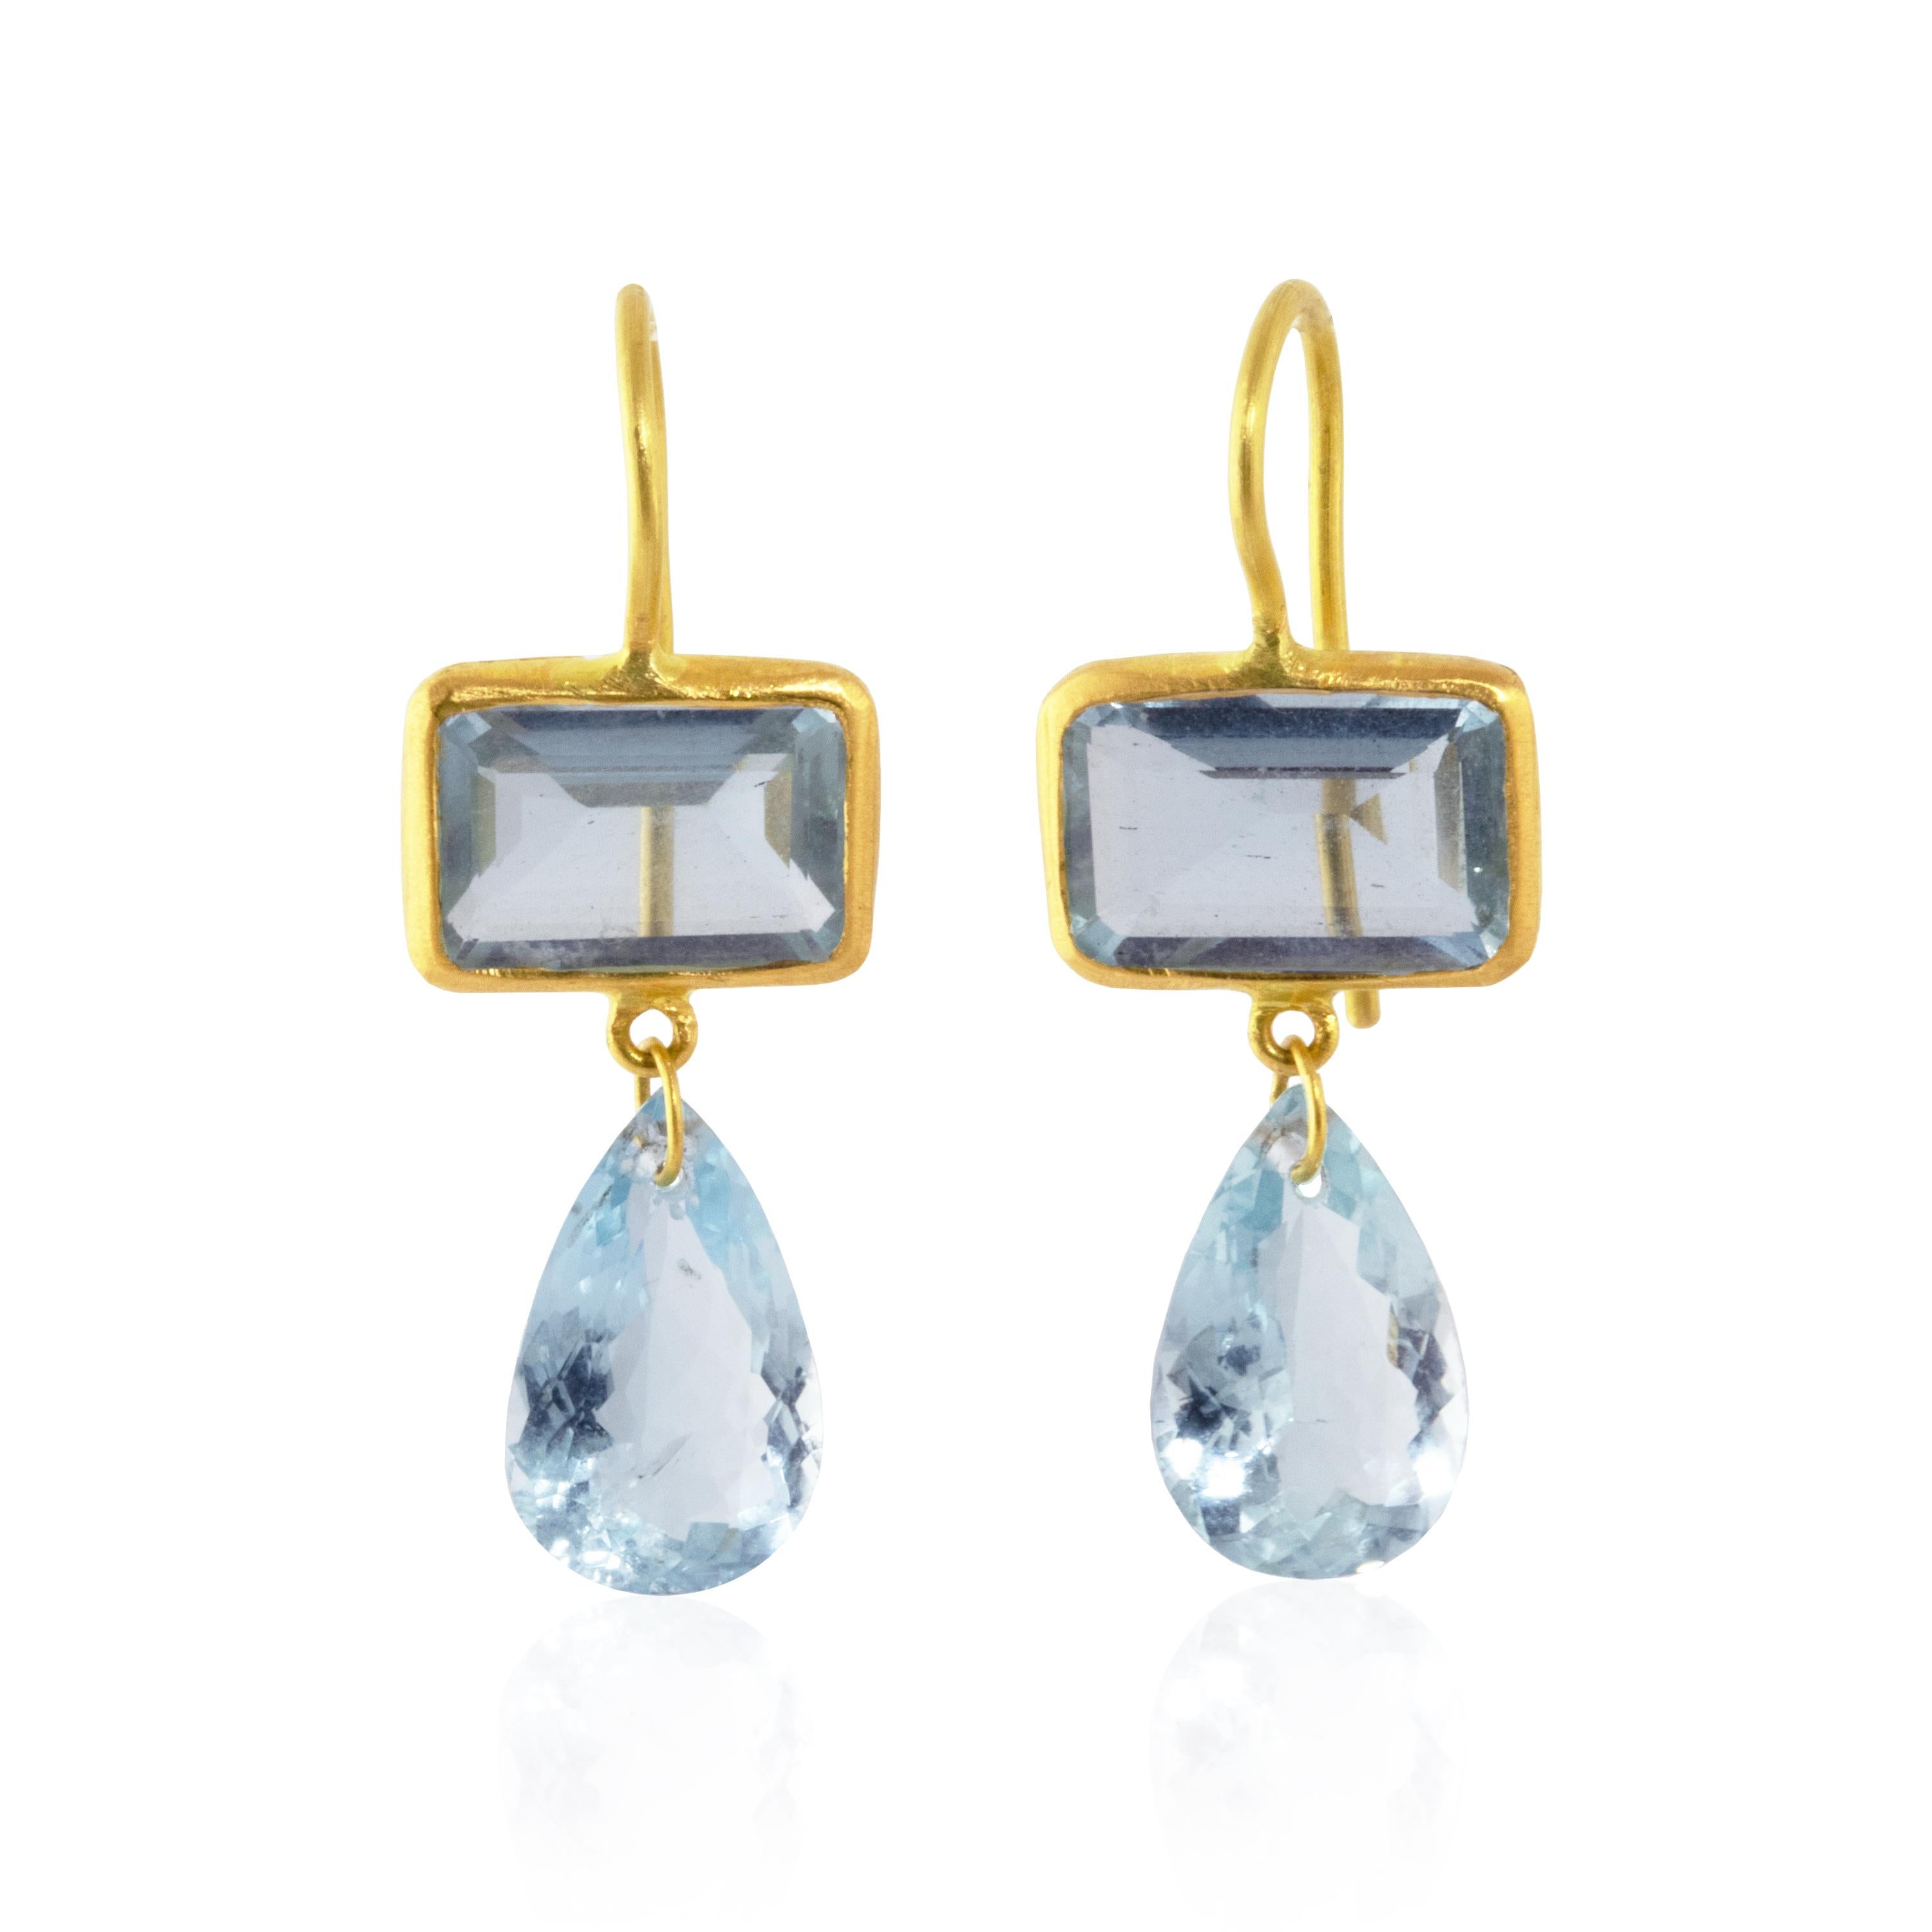 Elegant, essential drop earrings highlight the shimmering beauty of 9.2 carats of aquamarine rectangle and pear gemstones. The top gems are set in 22k gold with matching pear shaped drops. The color is a medium, deep blue color found in Santa Maria